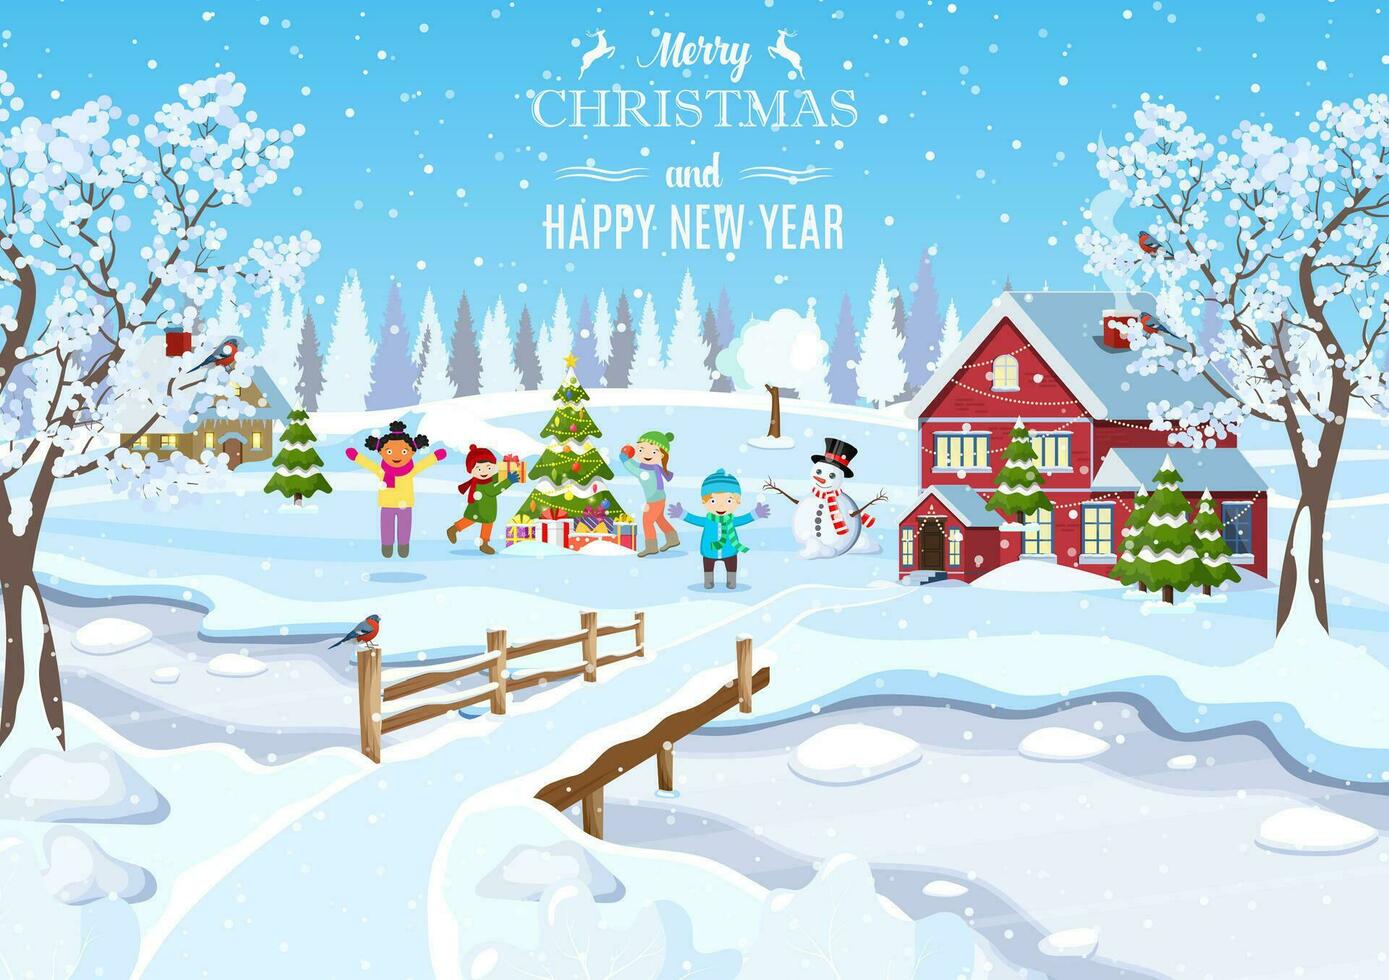 happy new year and merry Christmas greeting card. Winter fun. kids decorating a Christmas tree. Winter holidays. Christmas landscape tree spruce, snowman. vector illustration